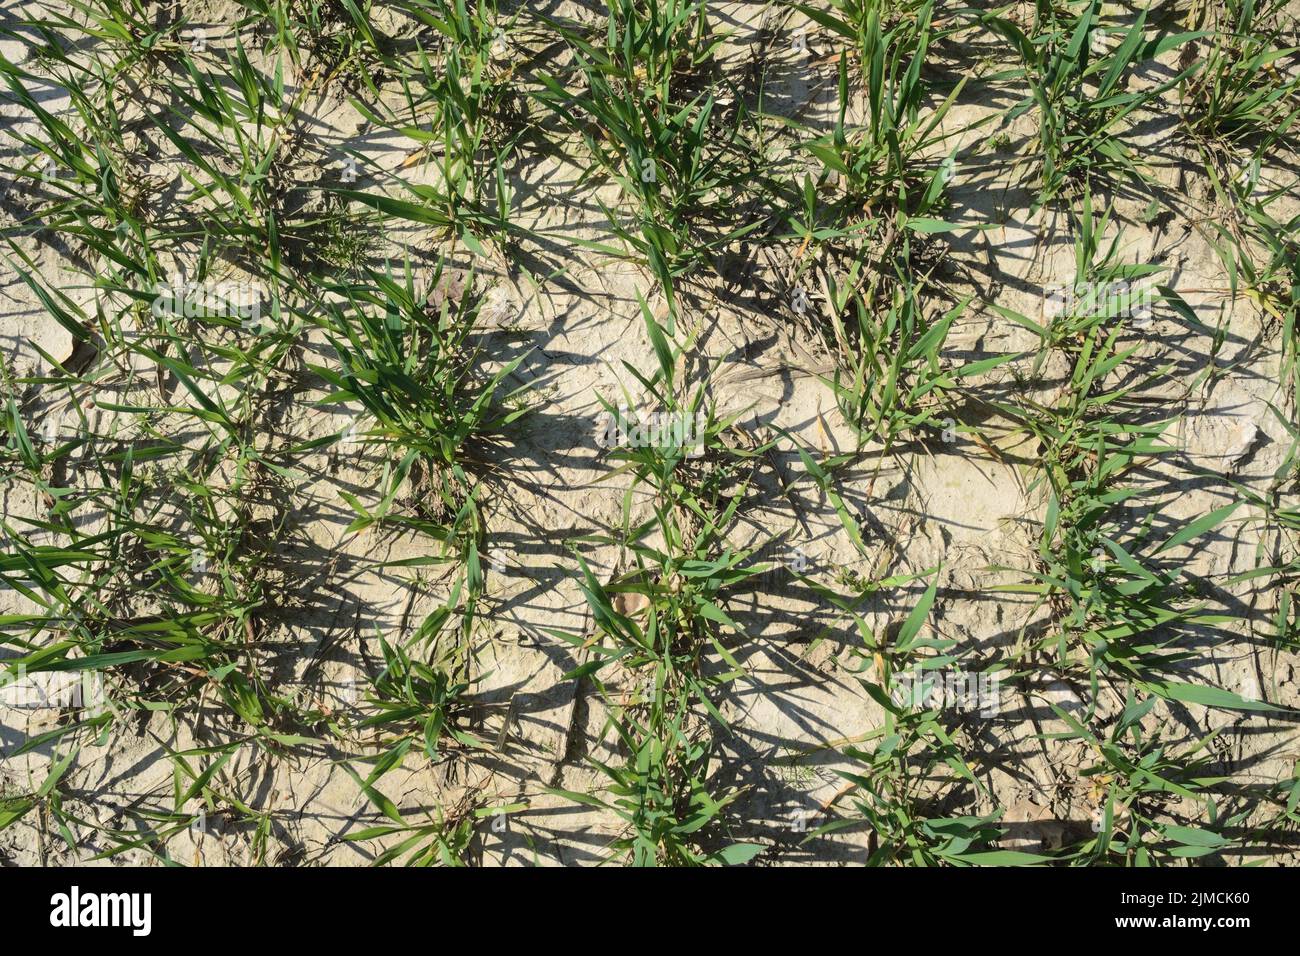 Young cereal plants on a dry ground, Germany Stock Photo